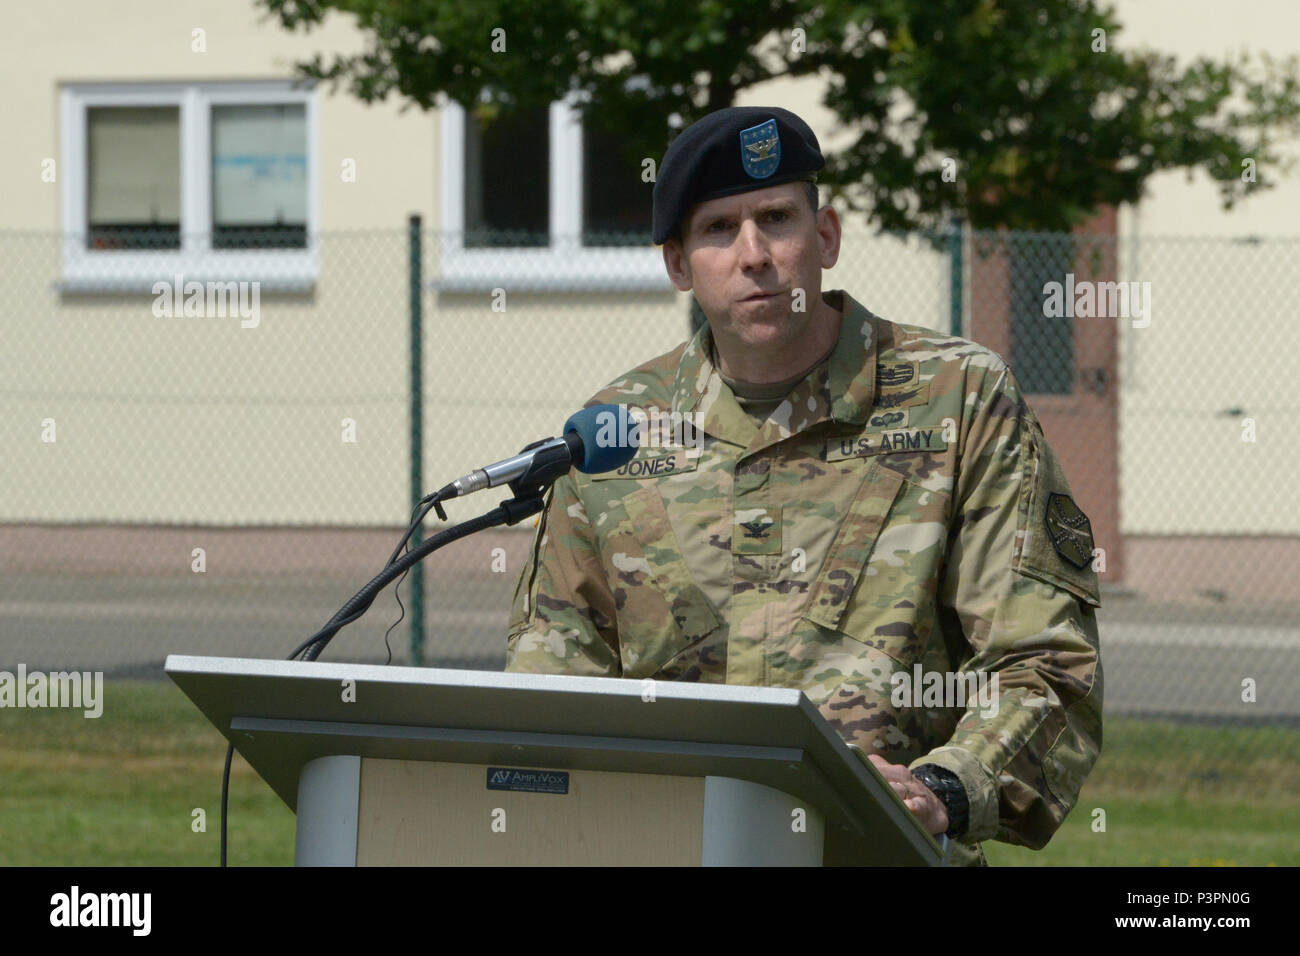 ANSBACH, Germany (July 21, 2016) – At the U.S. Army Garrison Ansbach change of command ceremony here Monday, Col. Benjamin C. Jones, incoming commander, speaks to ceremony attendees. Stock Photo